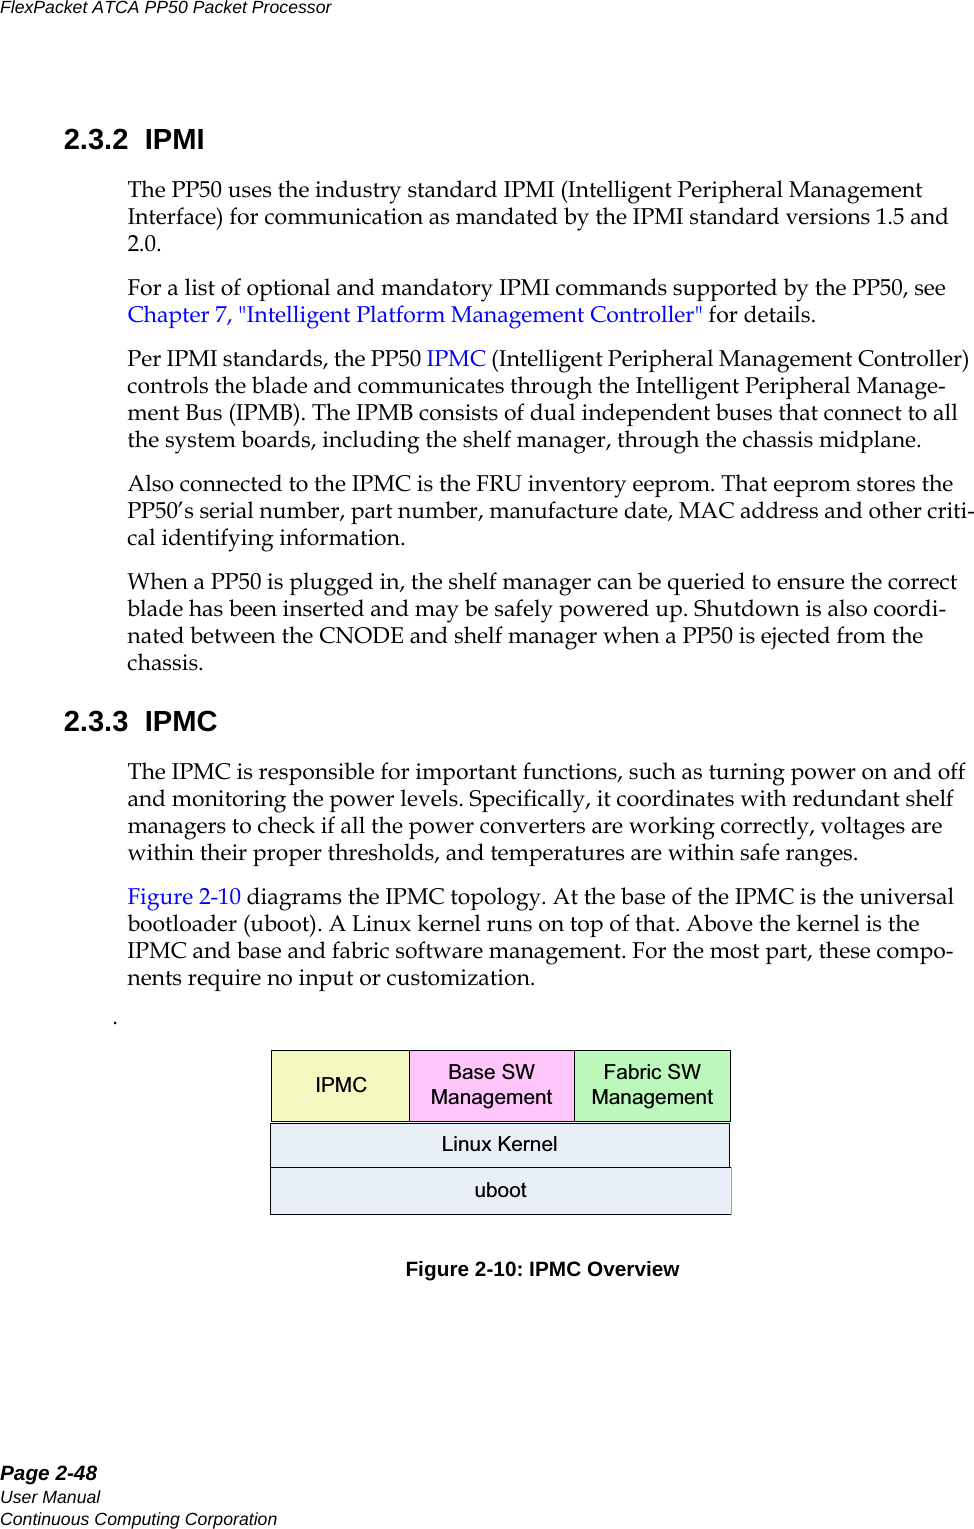 Page 2-48User ManualContinuous Computing CorporationFlexPacket ATCA PP50 Packet Processor     Preliminary2.3.2  IPMIThe PP50 uses the industry standard IPMI (Intelligent Peripheral Management Interface) for communication as mandated by the IPMI standard versions 1.5 and 2.0. For a list of optional and mandatory IPMI commands supported by the PP50, see Chapter7, &quot;Intelligent Platform Management Controller&quot; for details. Per IPMI standards, the PP50 IPMC (Intelligent Peripheral Management Controller) controls the blade and communicates through the Intelligent Peripheral Manage-ment Bus (IPMB). The IPMB consists of dual independent buses that connect to all the system boards, including the shelf manager, through the chassis midplane. Also connected to the IPMC is the FRU inventory eeprom. That eeprom stores the PP50’s serial number, part number, manufacture date, MAC address and other criti-cal identifying information. When a PP50 is plugged in, the shelf manager can be queried to ensure the correct blade has been inserted and may be safely powered up. Shutdown is also coordi-nated between the CNODE and shelf manager when a PP50 is ejected from the chassis.2.3.3  IPMCThe IPMC is responsible for important functions, such as turning power on and off and monitoring the power levels. Specifically, it coordinates with redundant shelf managers to check if all the power converters are working correctly, voltages are within their proper thresholds, and temperatures are within safe ranges. Figure 2-10 diagrams the IPMC topology. At the base of the IPMC is the universal bootloader (uboot). A Linux kernel runs on top of that. Above the kernel is the IPMC and base and fabric software management. For the most part, these compo-nents require no input or customization. .Figure 2-10: IPMC OverviewIPMC Base SWManagementFabric SWManagementLinux Kerneluboot